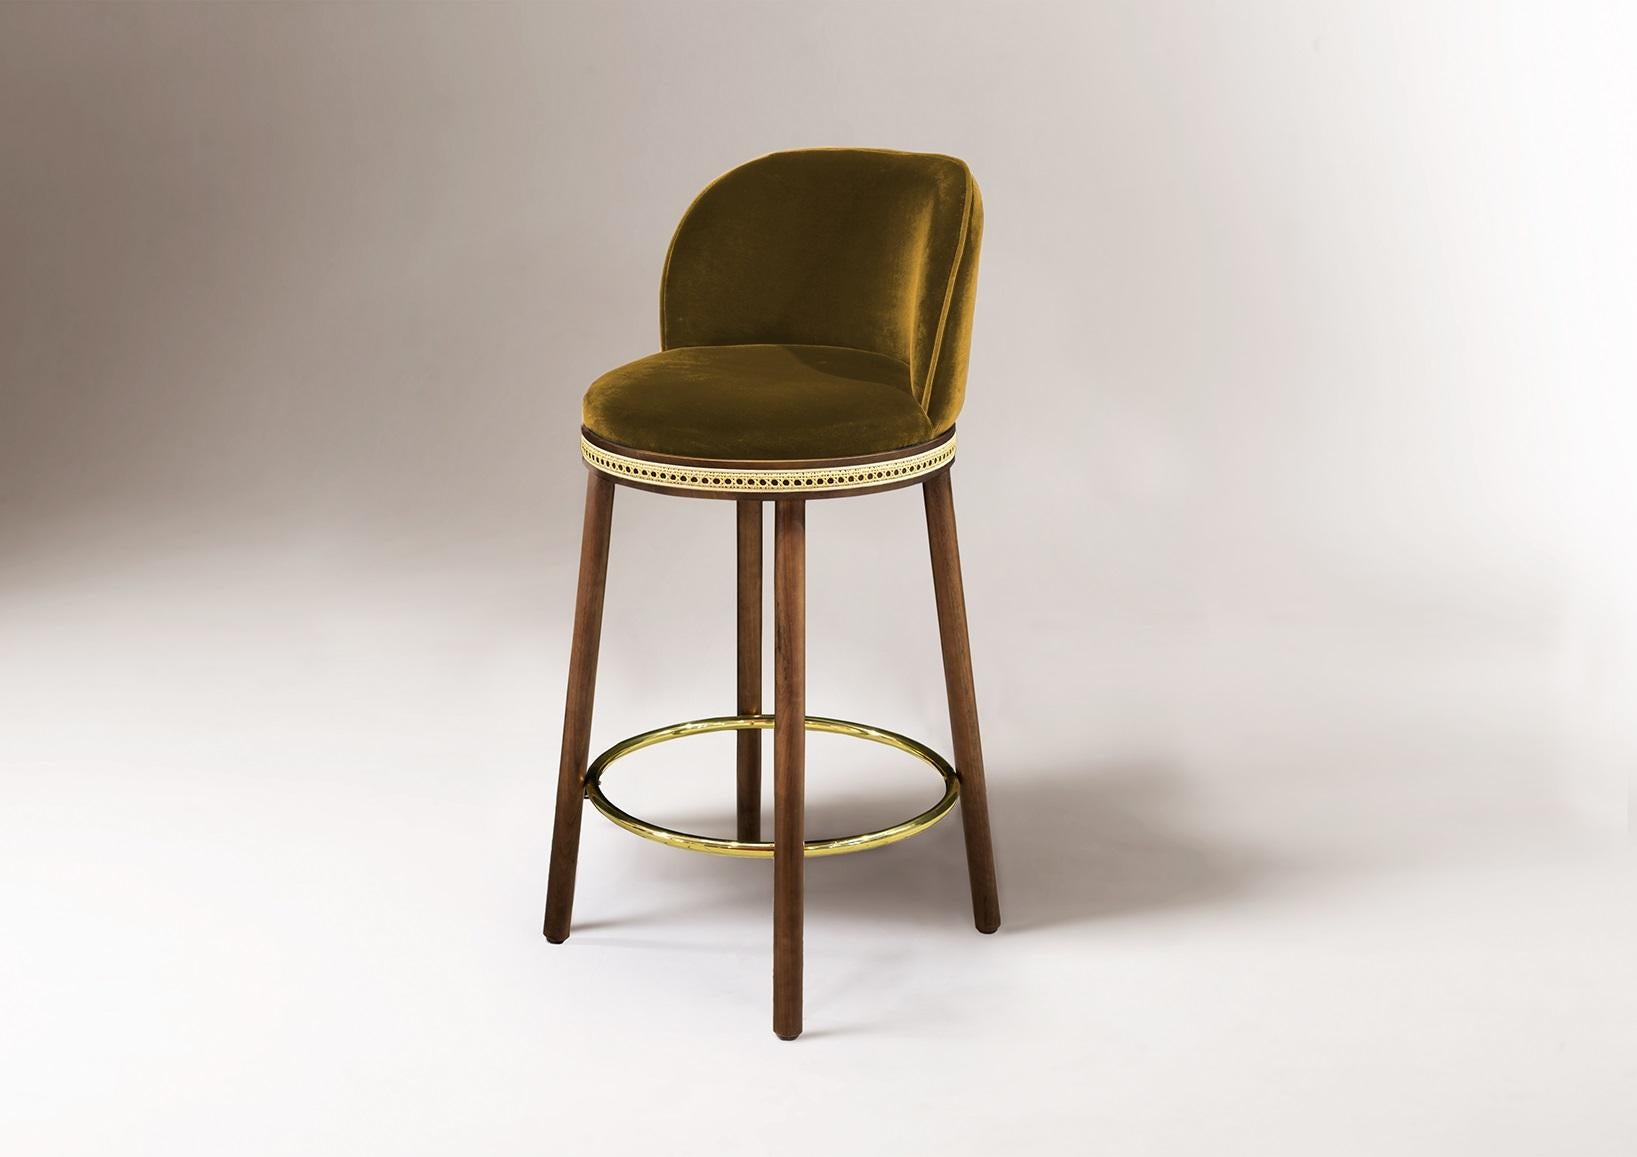 DOOQ Mid-Century Modern Bar Chair Alma with Mustard Velvet, Walnut and Brass

In a piece that combines classic and modern aesthetics we can find a certain harmonic gracefulness paired with an intimate voluptuousness that can embrace you and